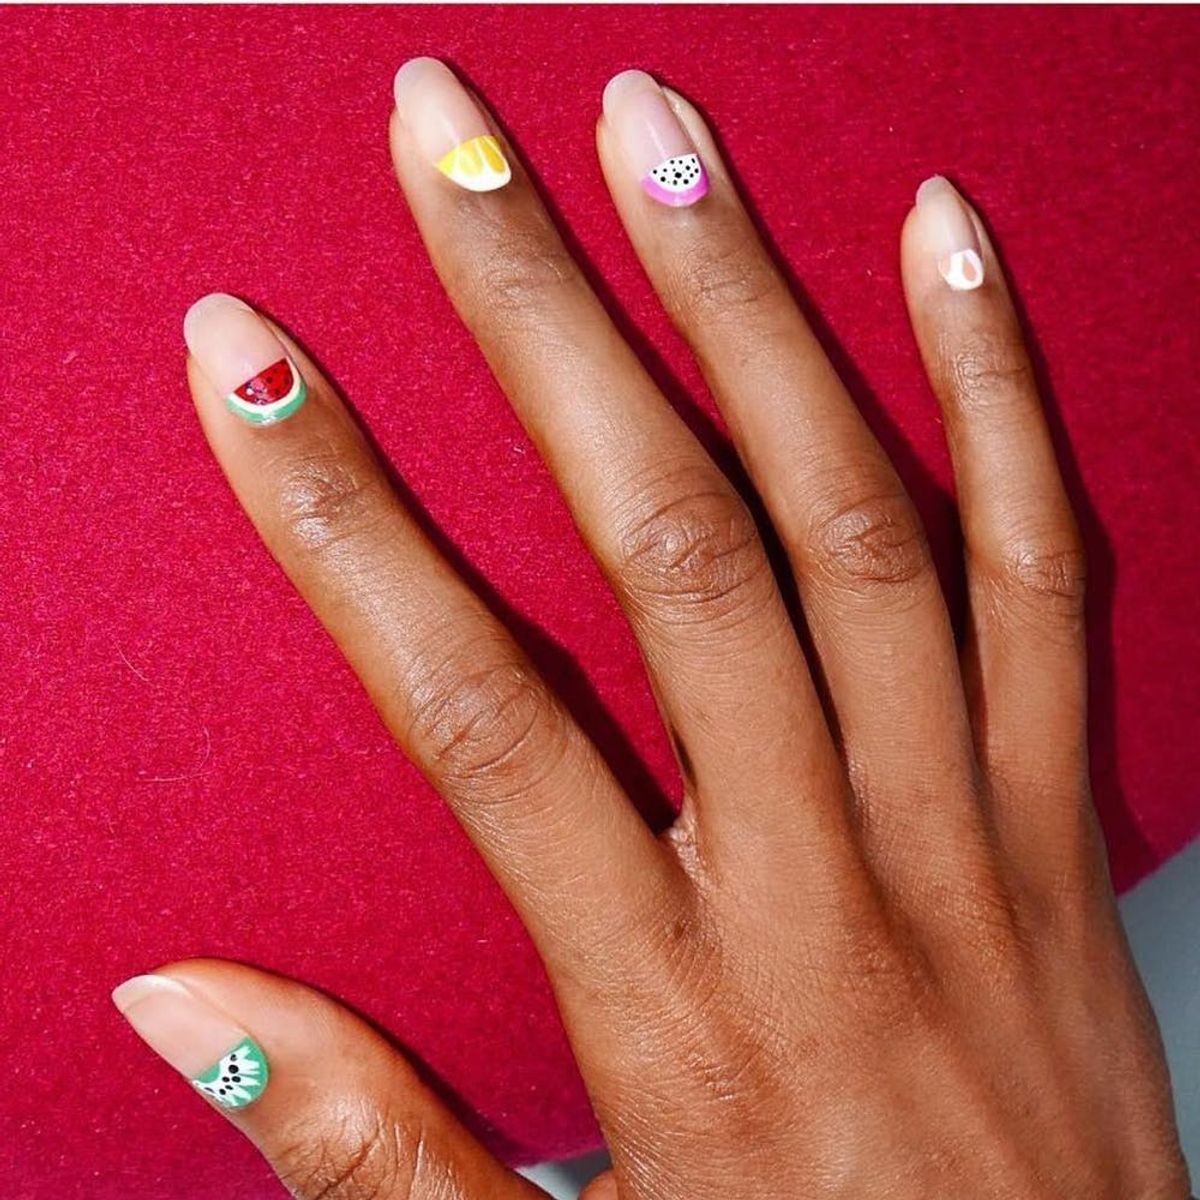 11 Fruit Nail Art Ideas That Are Perfect for Summertime